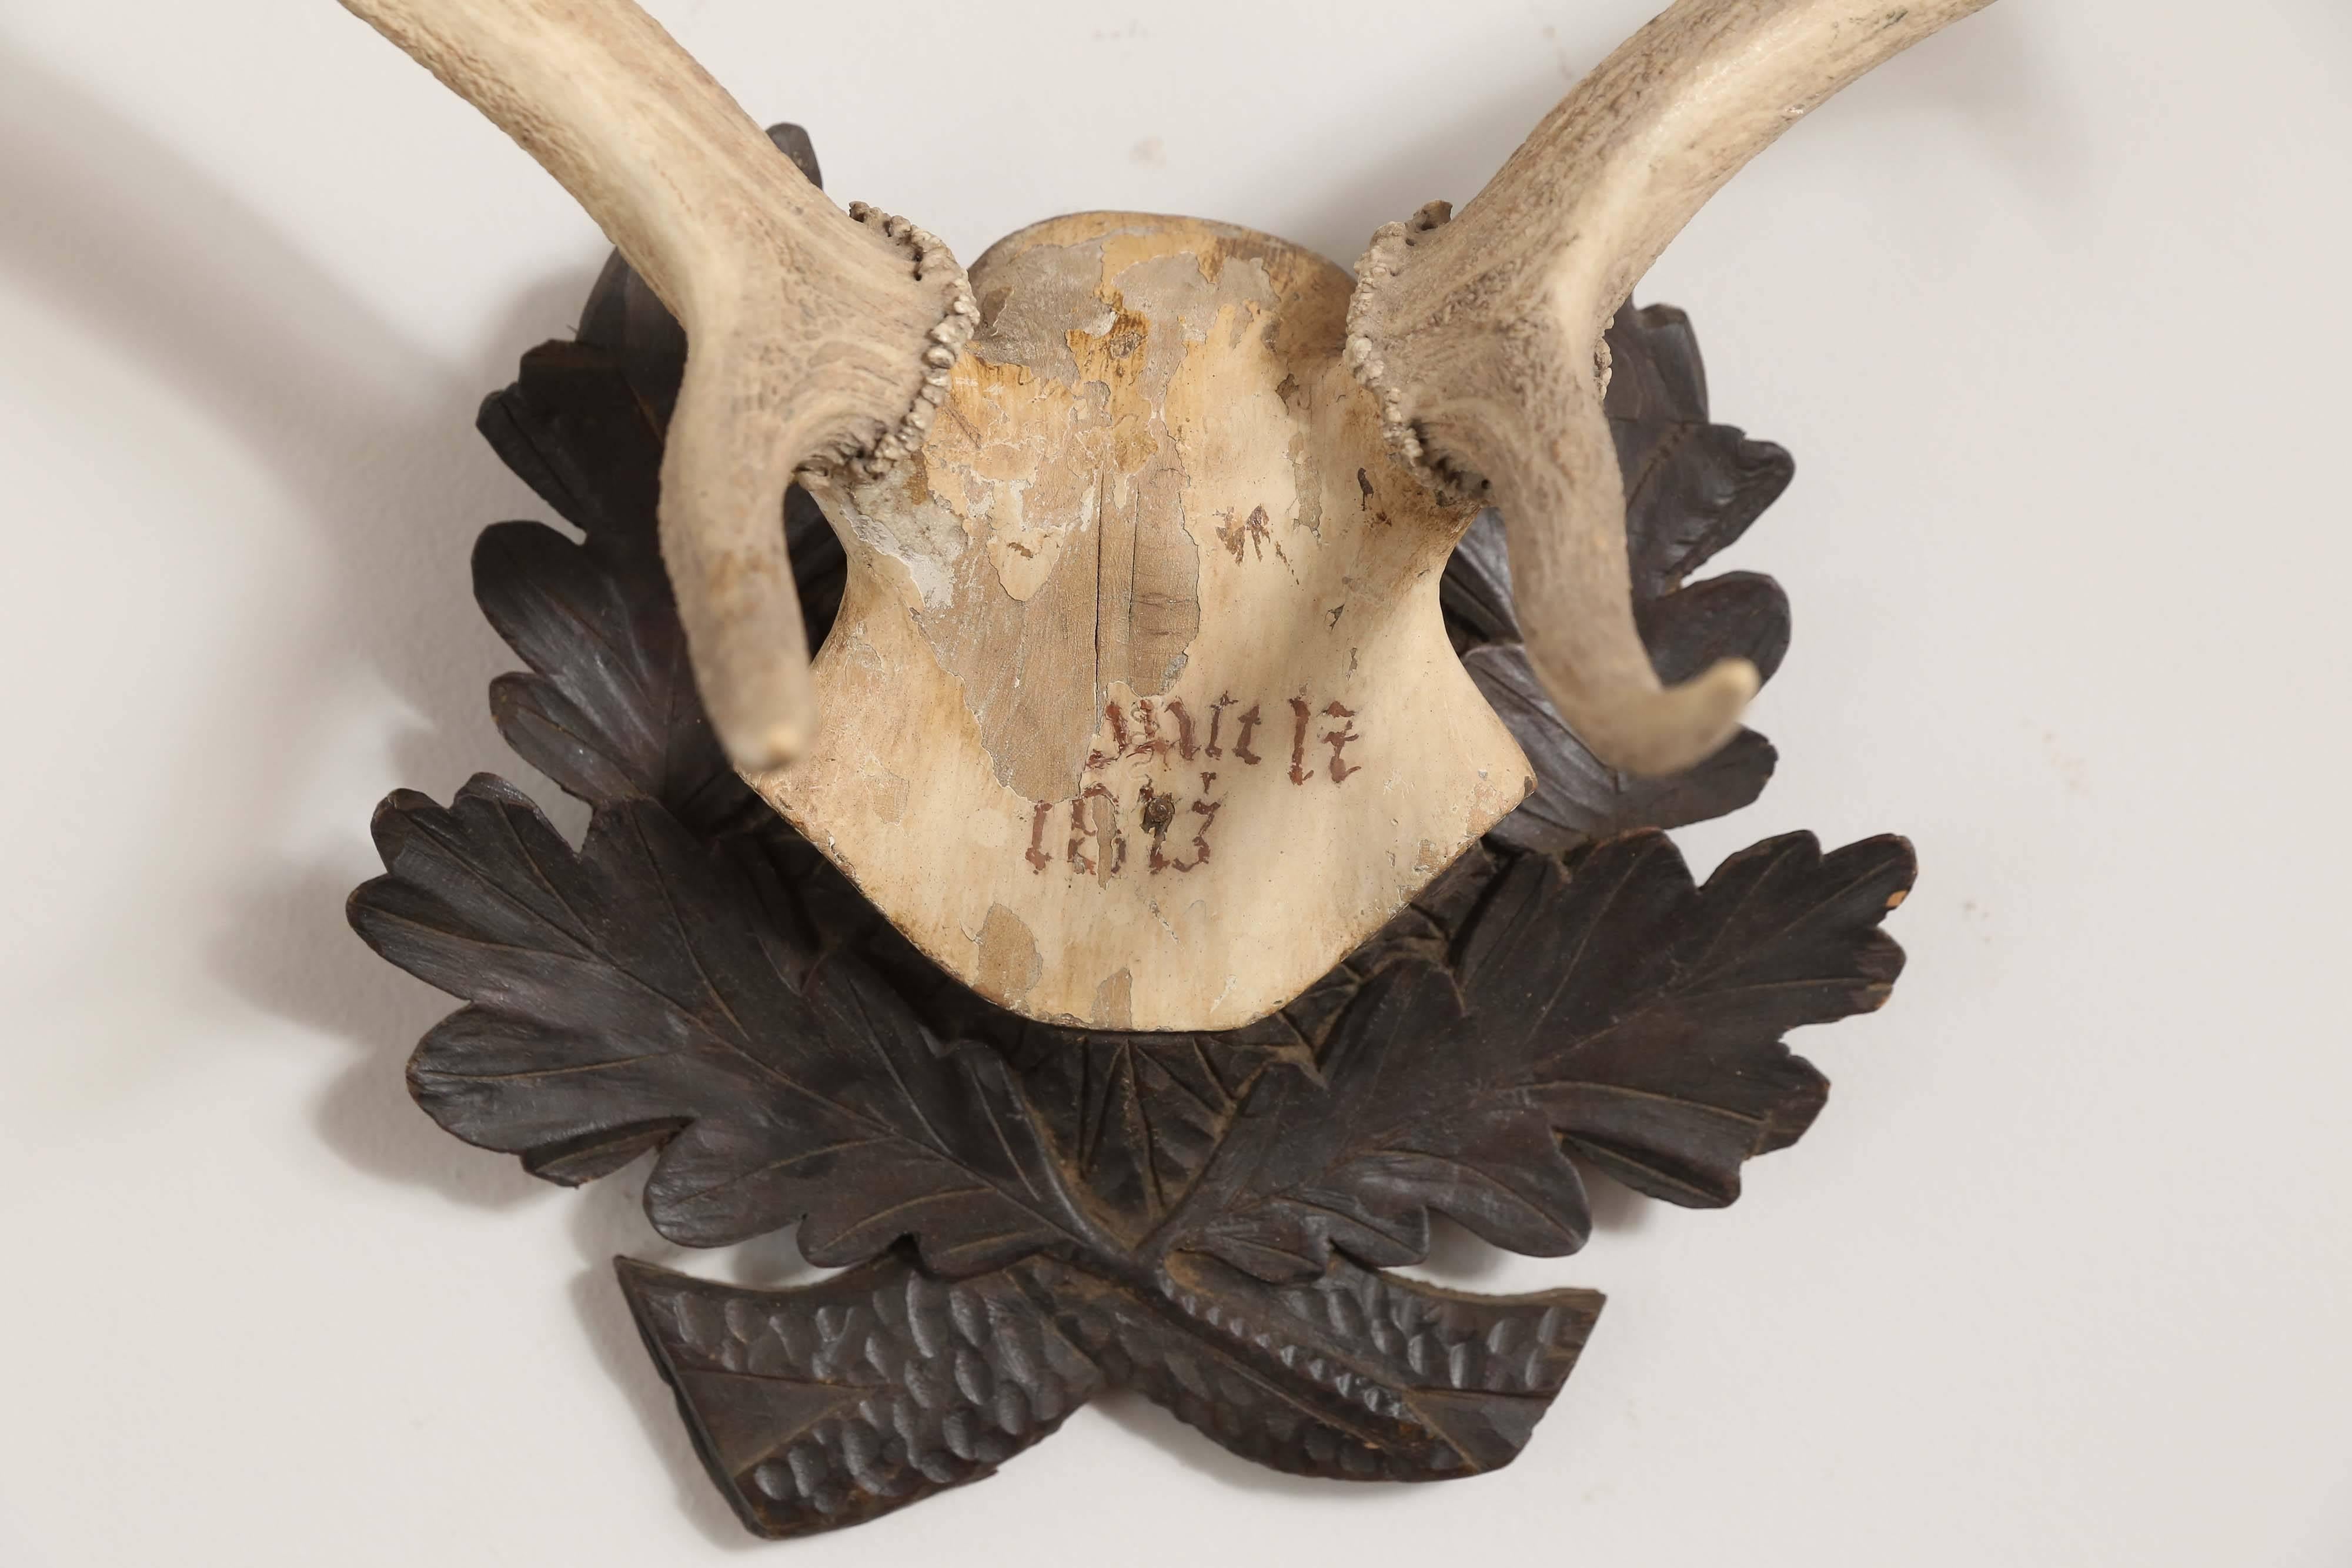 19th century fallow deer trophy from Emperor Franz Joseph's castle at Eckartsau in the Southern Austrian Alps, a favourite hunting schloss of the Habsburg Royal family. This historic hunting trophy features the original Black Forest carved plaque